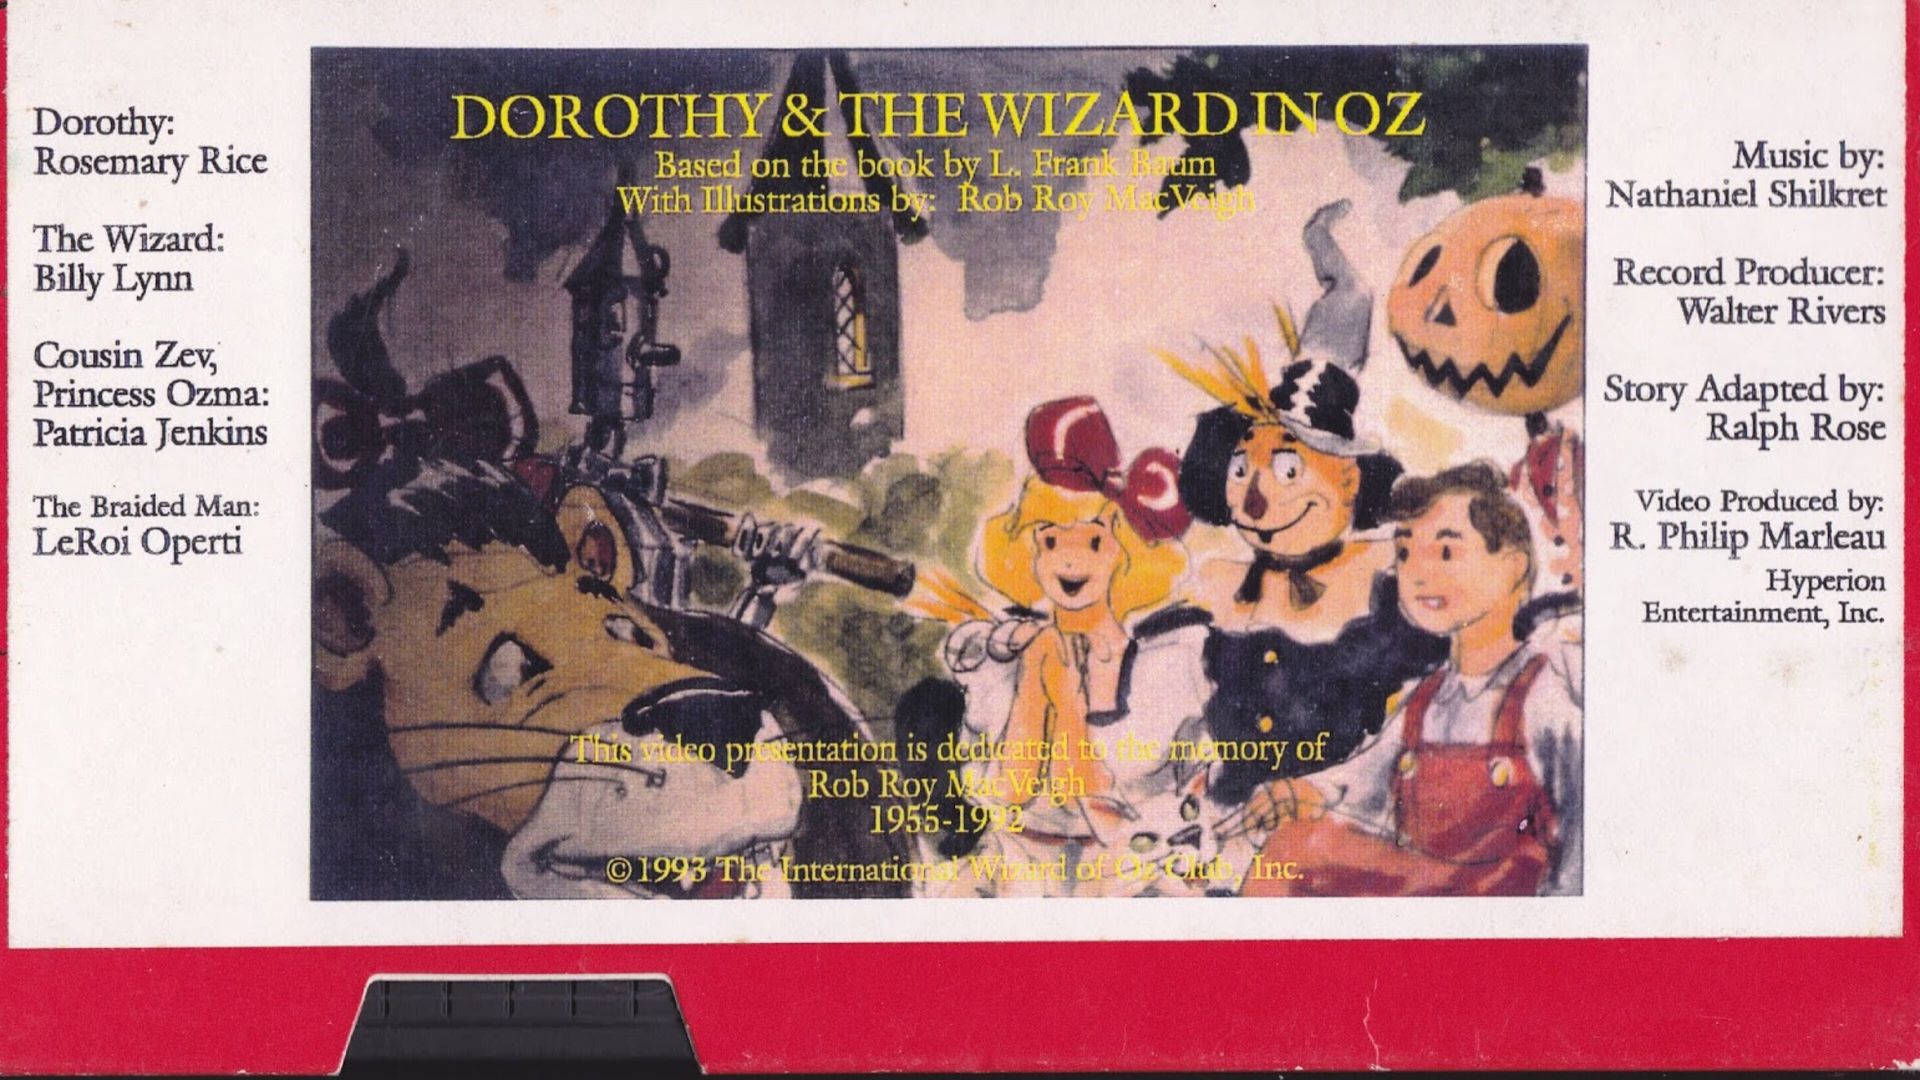 Dorothy & the Wizard in Oz background